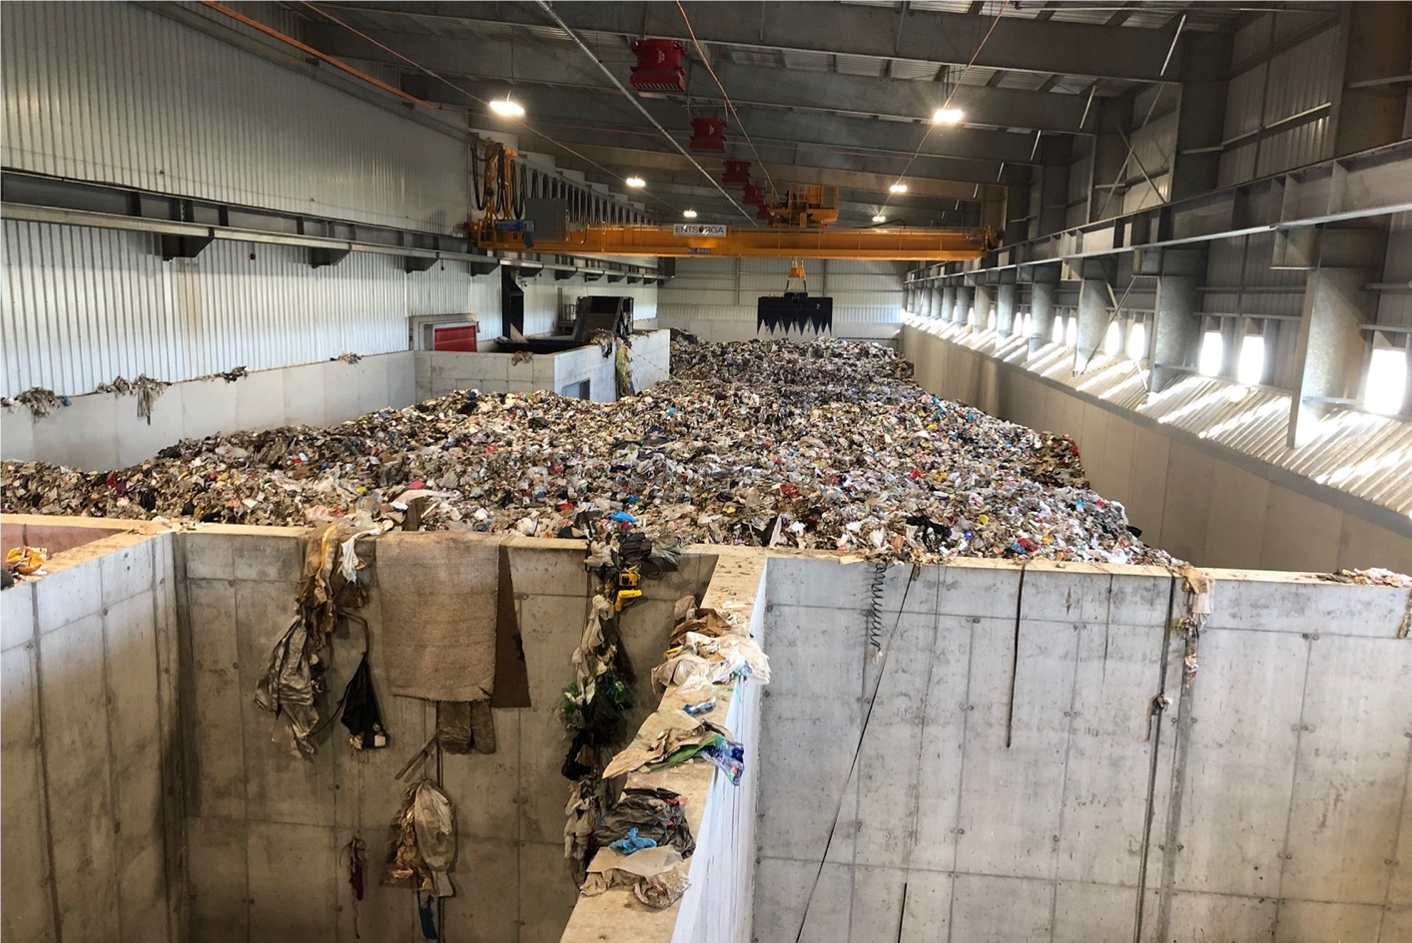 Entsorga West Virginia redefines waste management by using innovative recycling technology